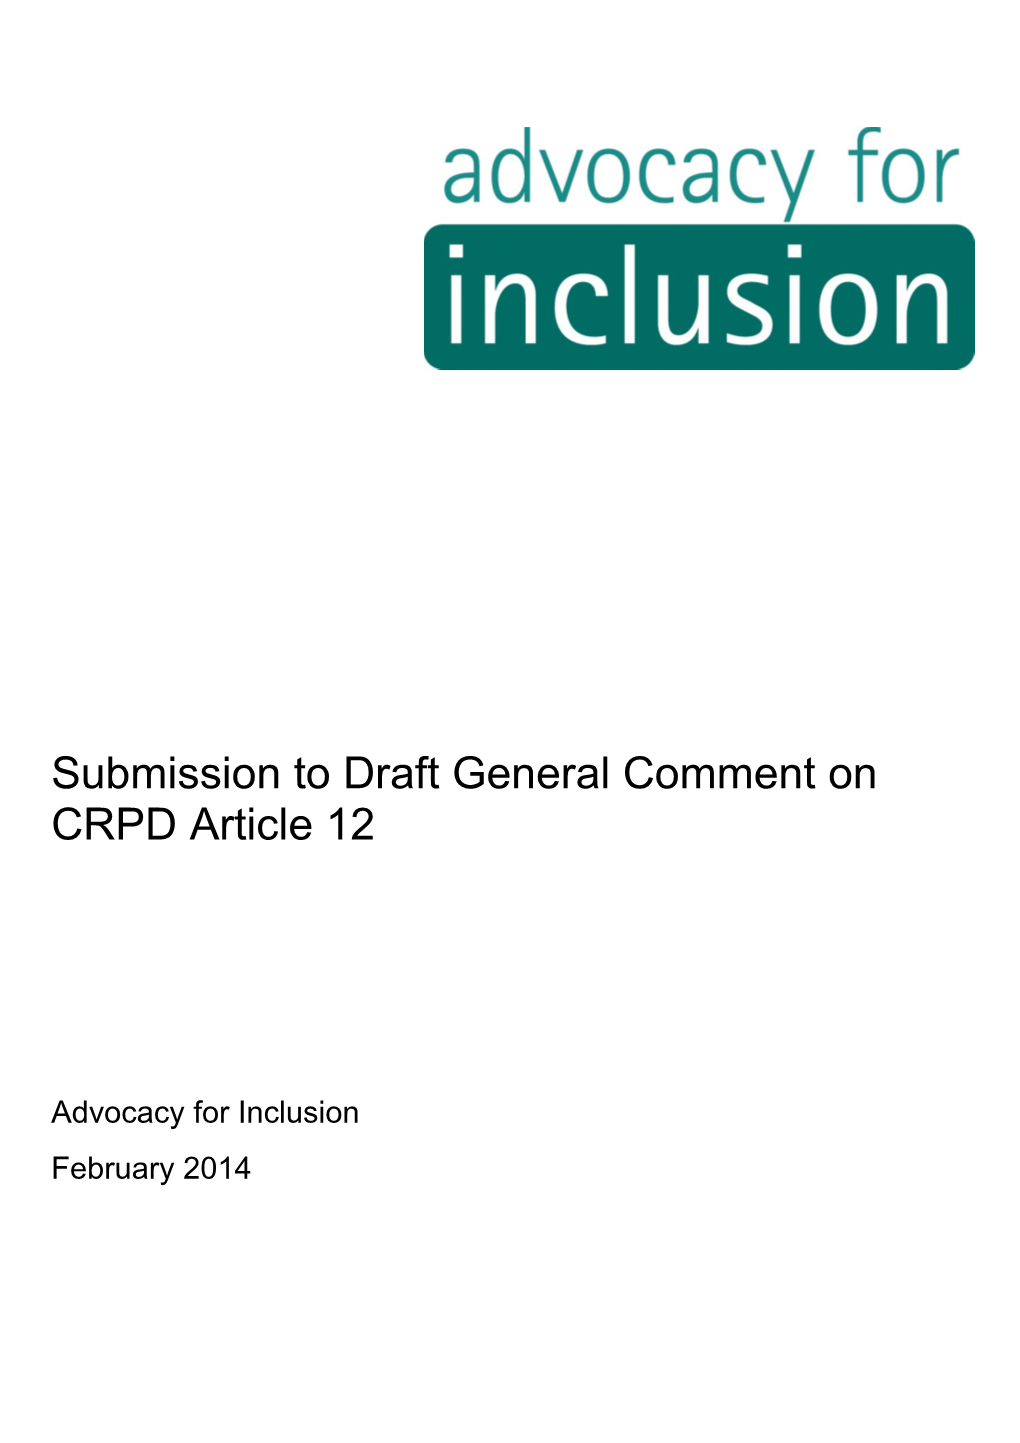 Submission to Draft General Comment on CRPD Article 12